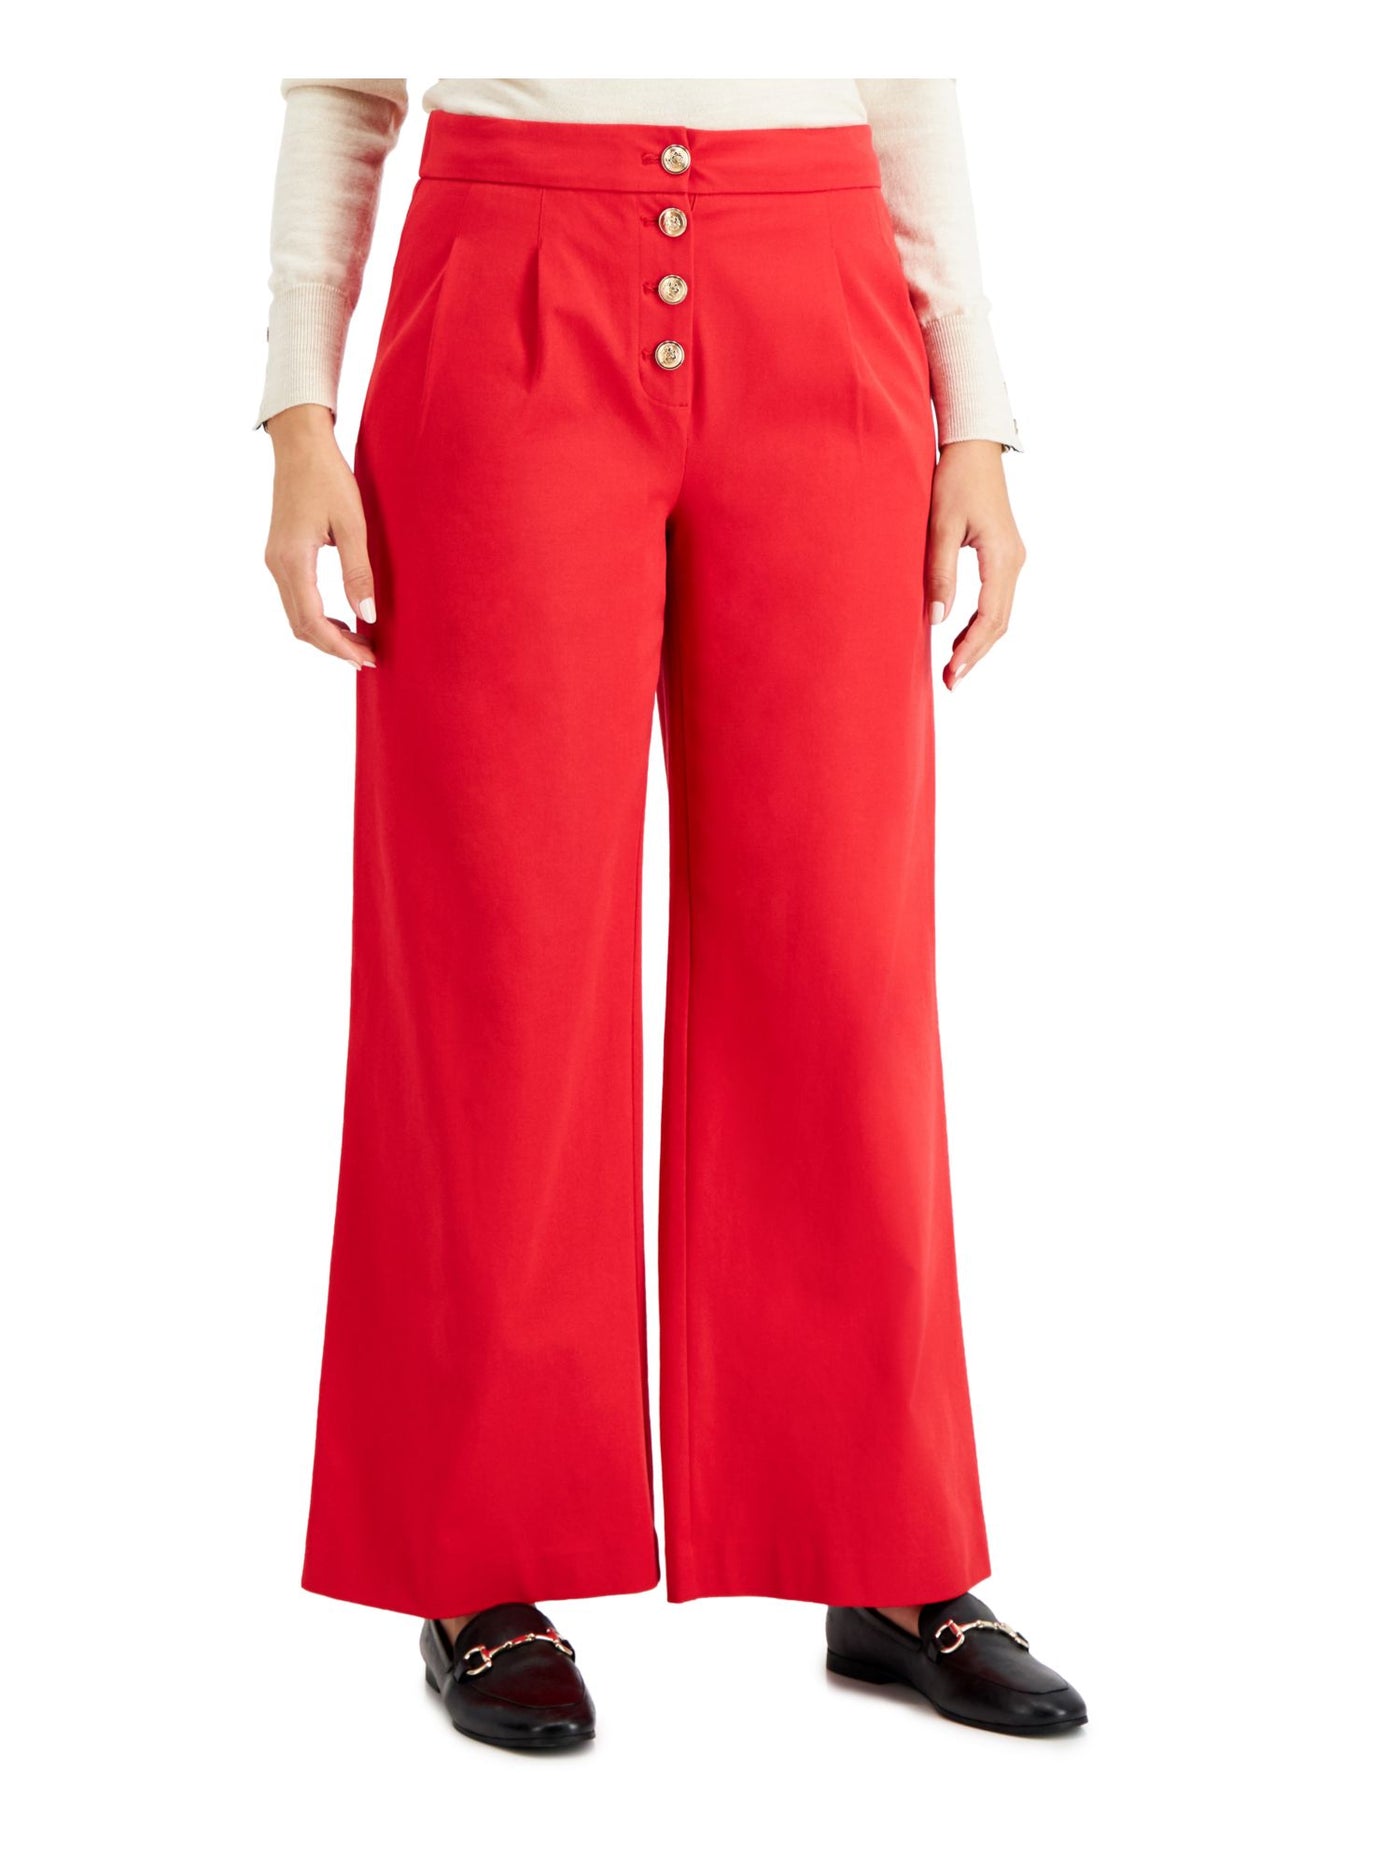 CHARTER CLUB Womens Red Stretch Pleated Pocketed Button Fly Wear To Work Wide Leg Pants 18